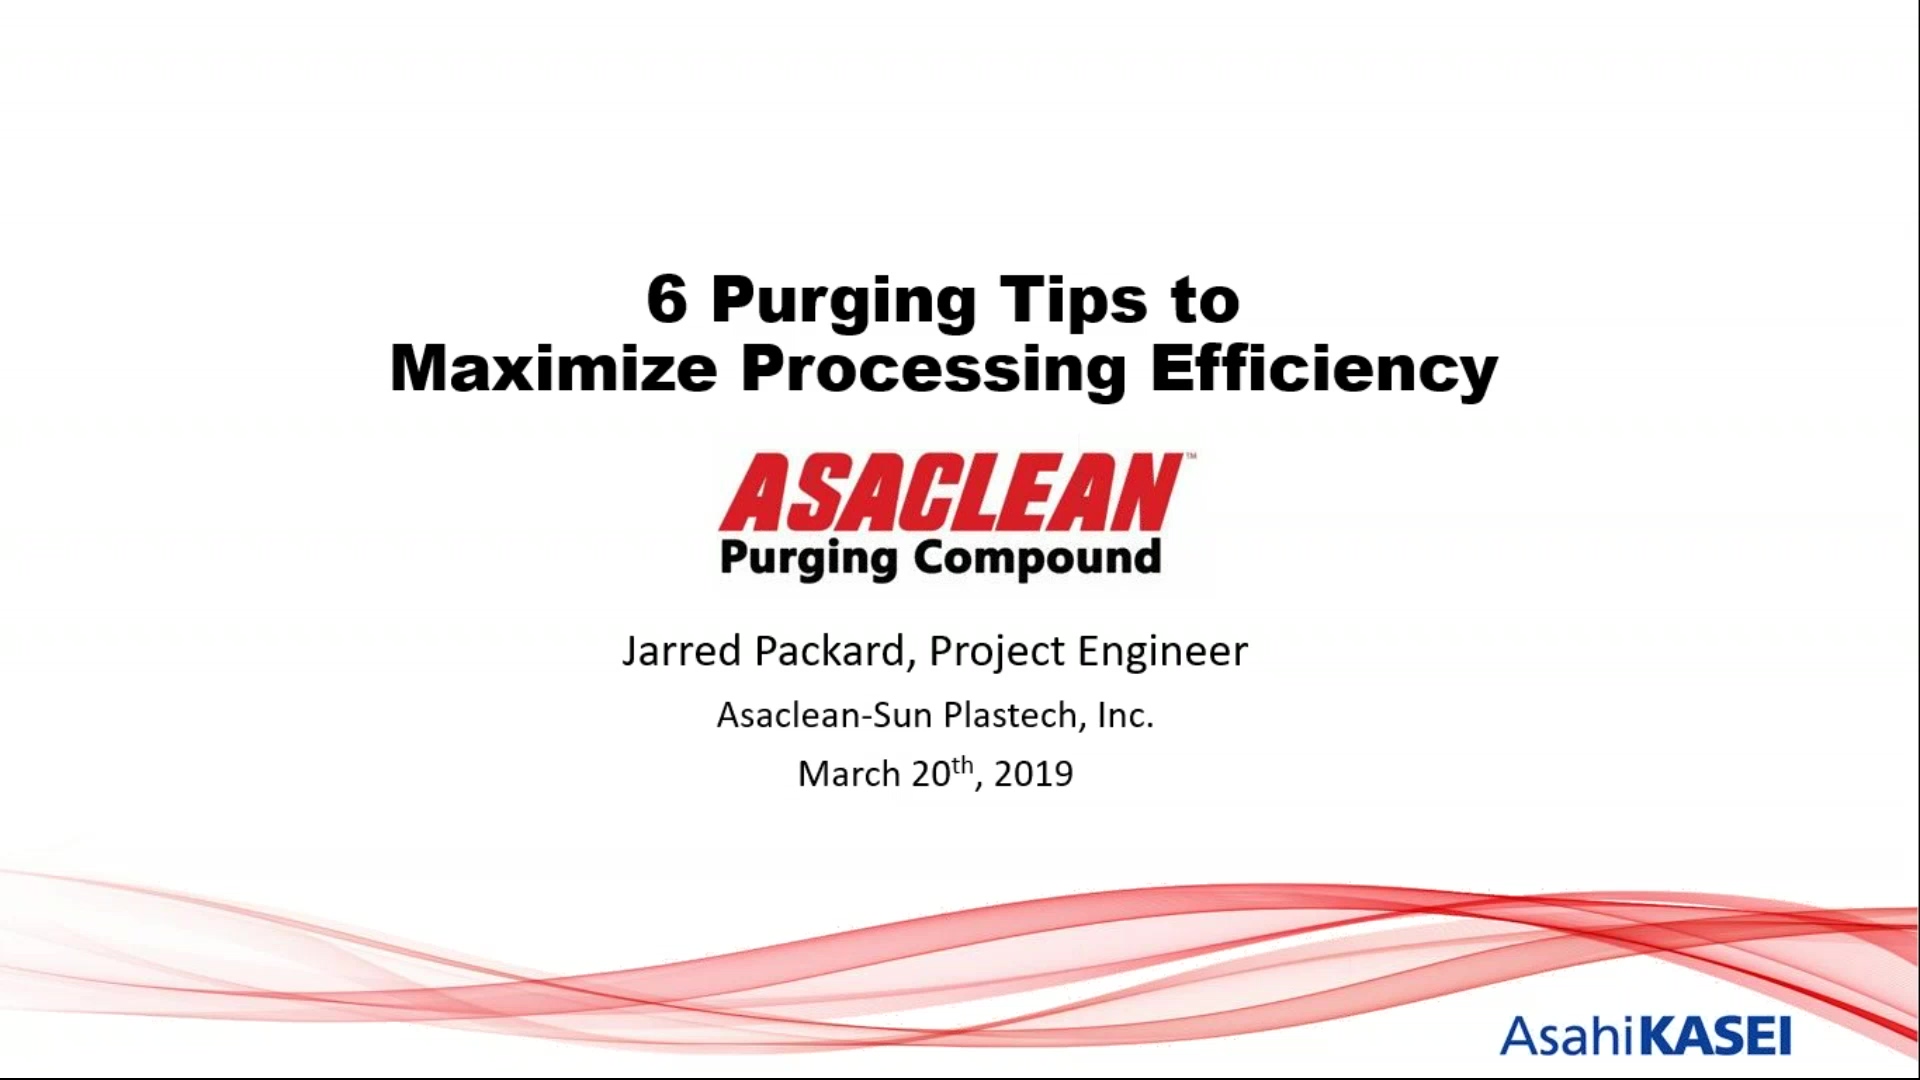 6 Purging Tips to Maximize Processing Efficiency